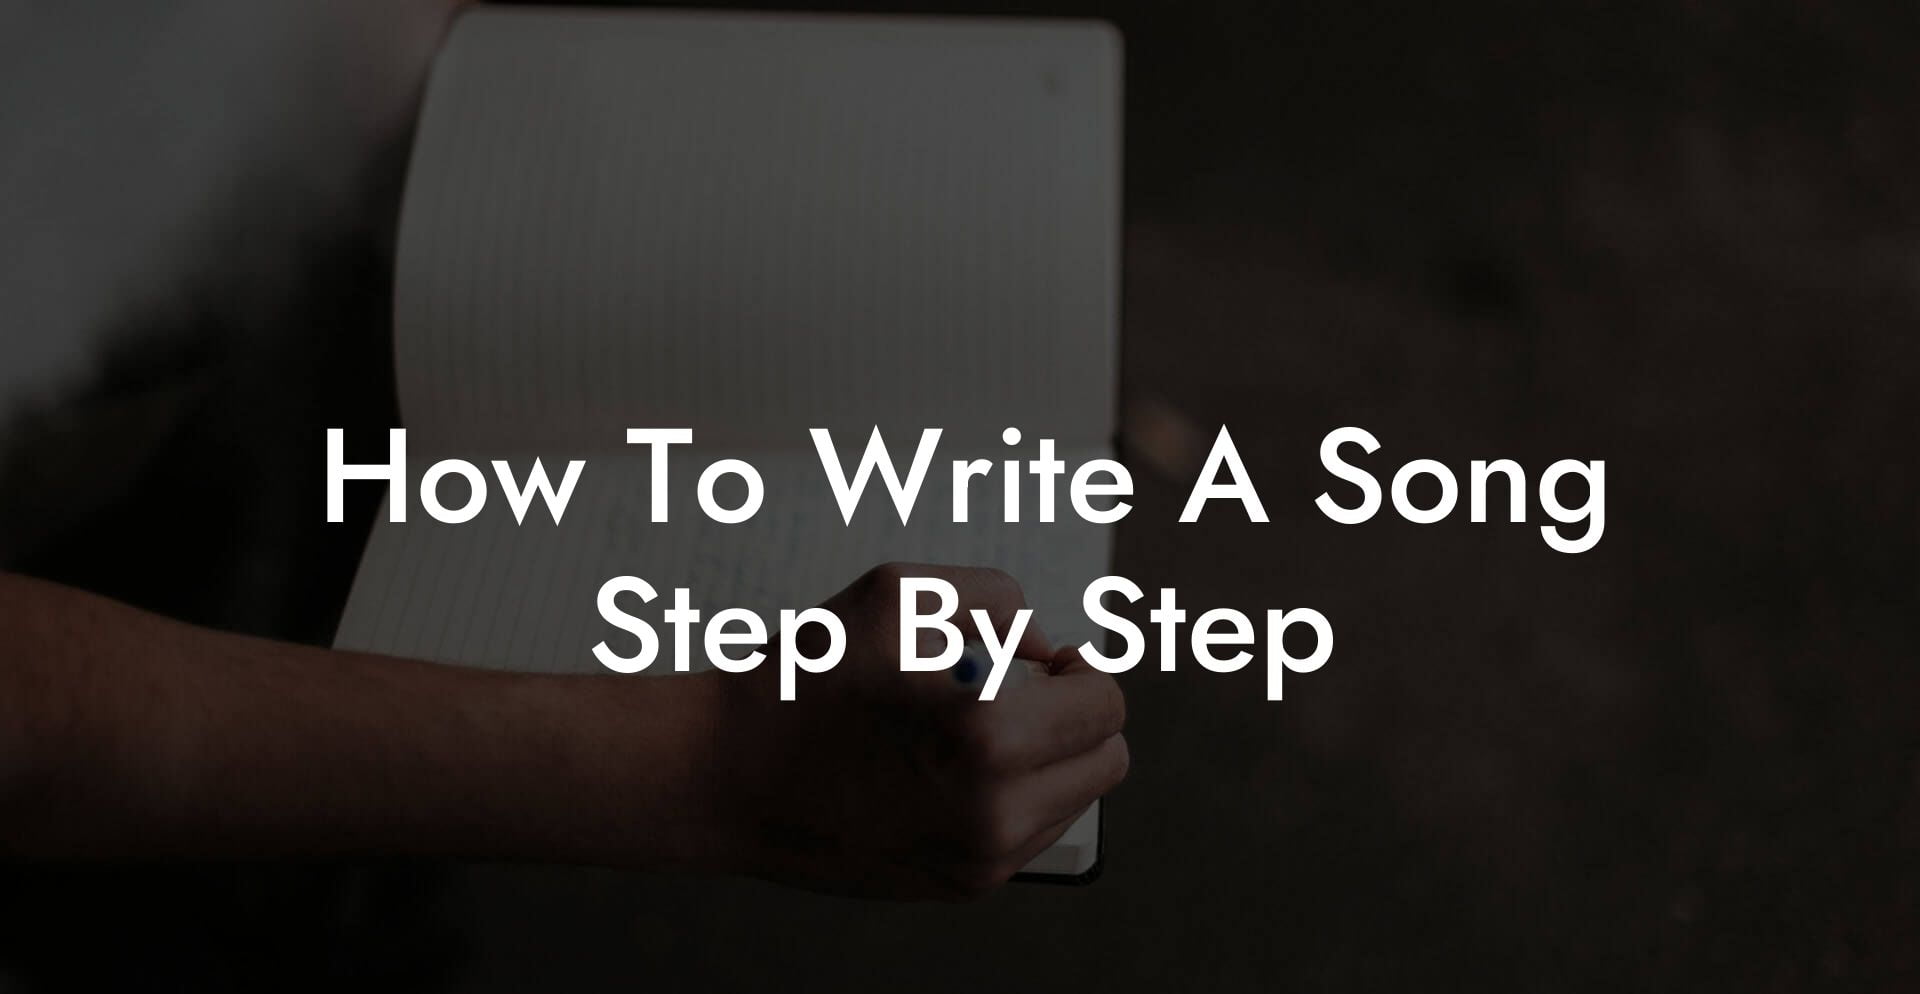 how to write a song step by step lyric assistant